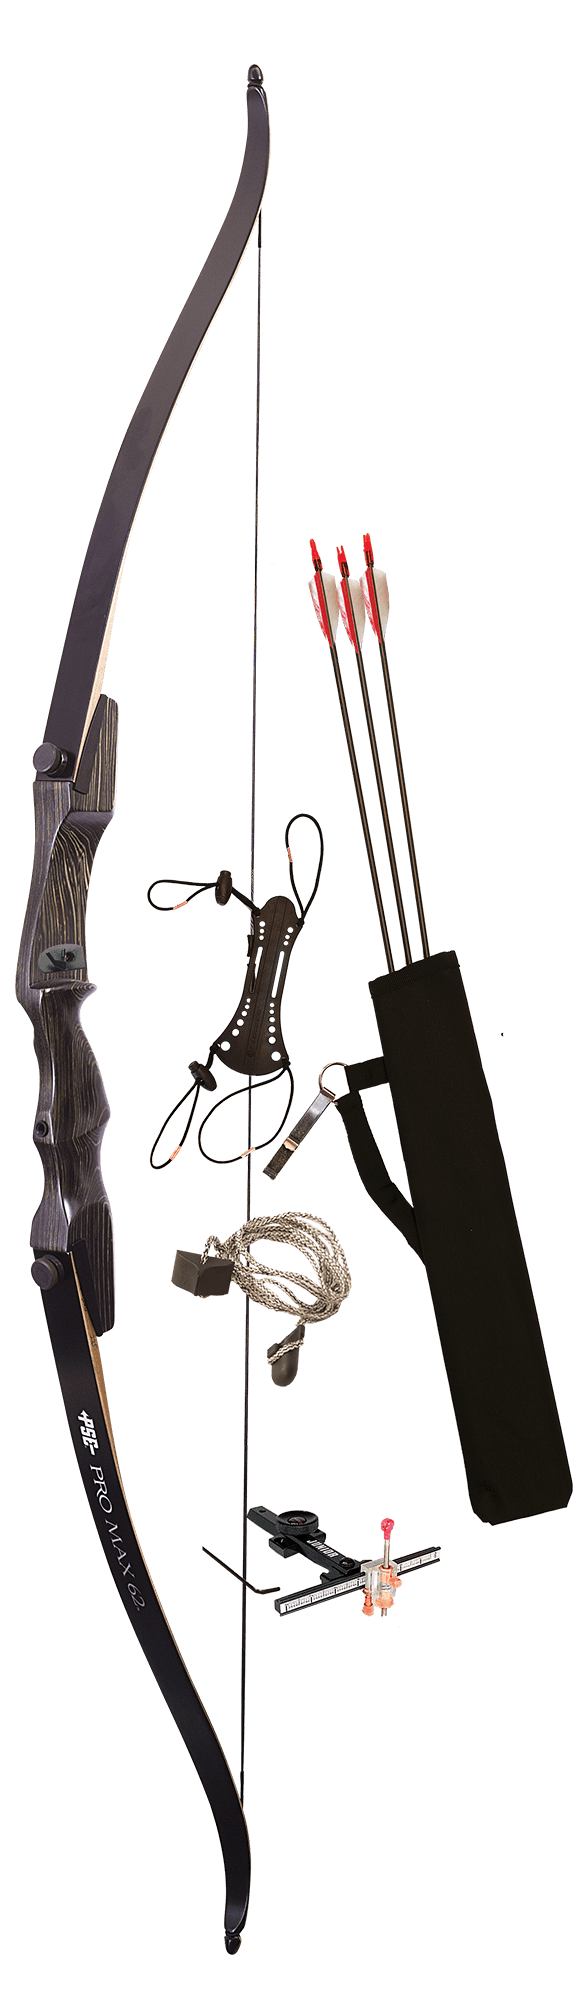 PSE Archery Pro Max 54" Traditional Recurve Bow Package - Leapfrog Outdoor Sports and Apparel